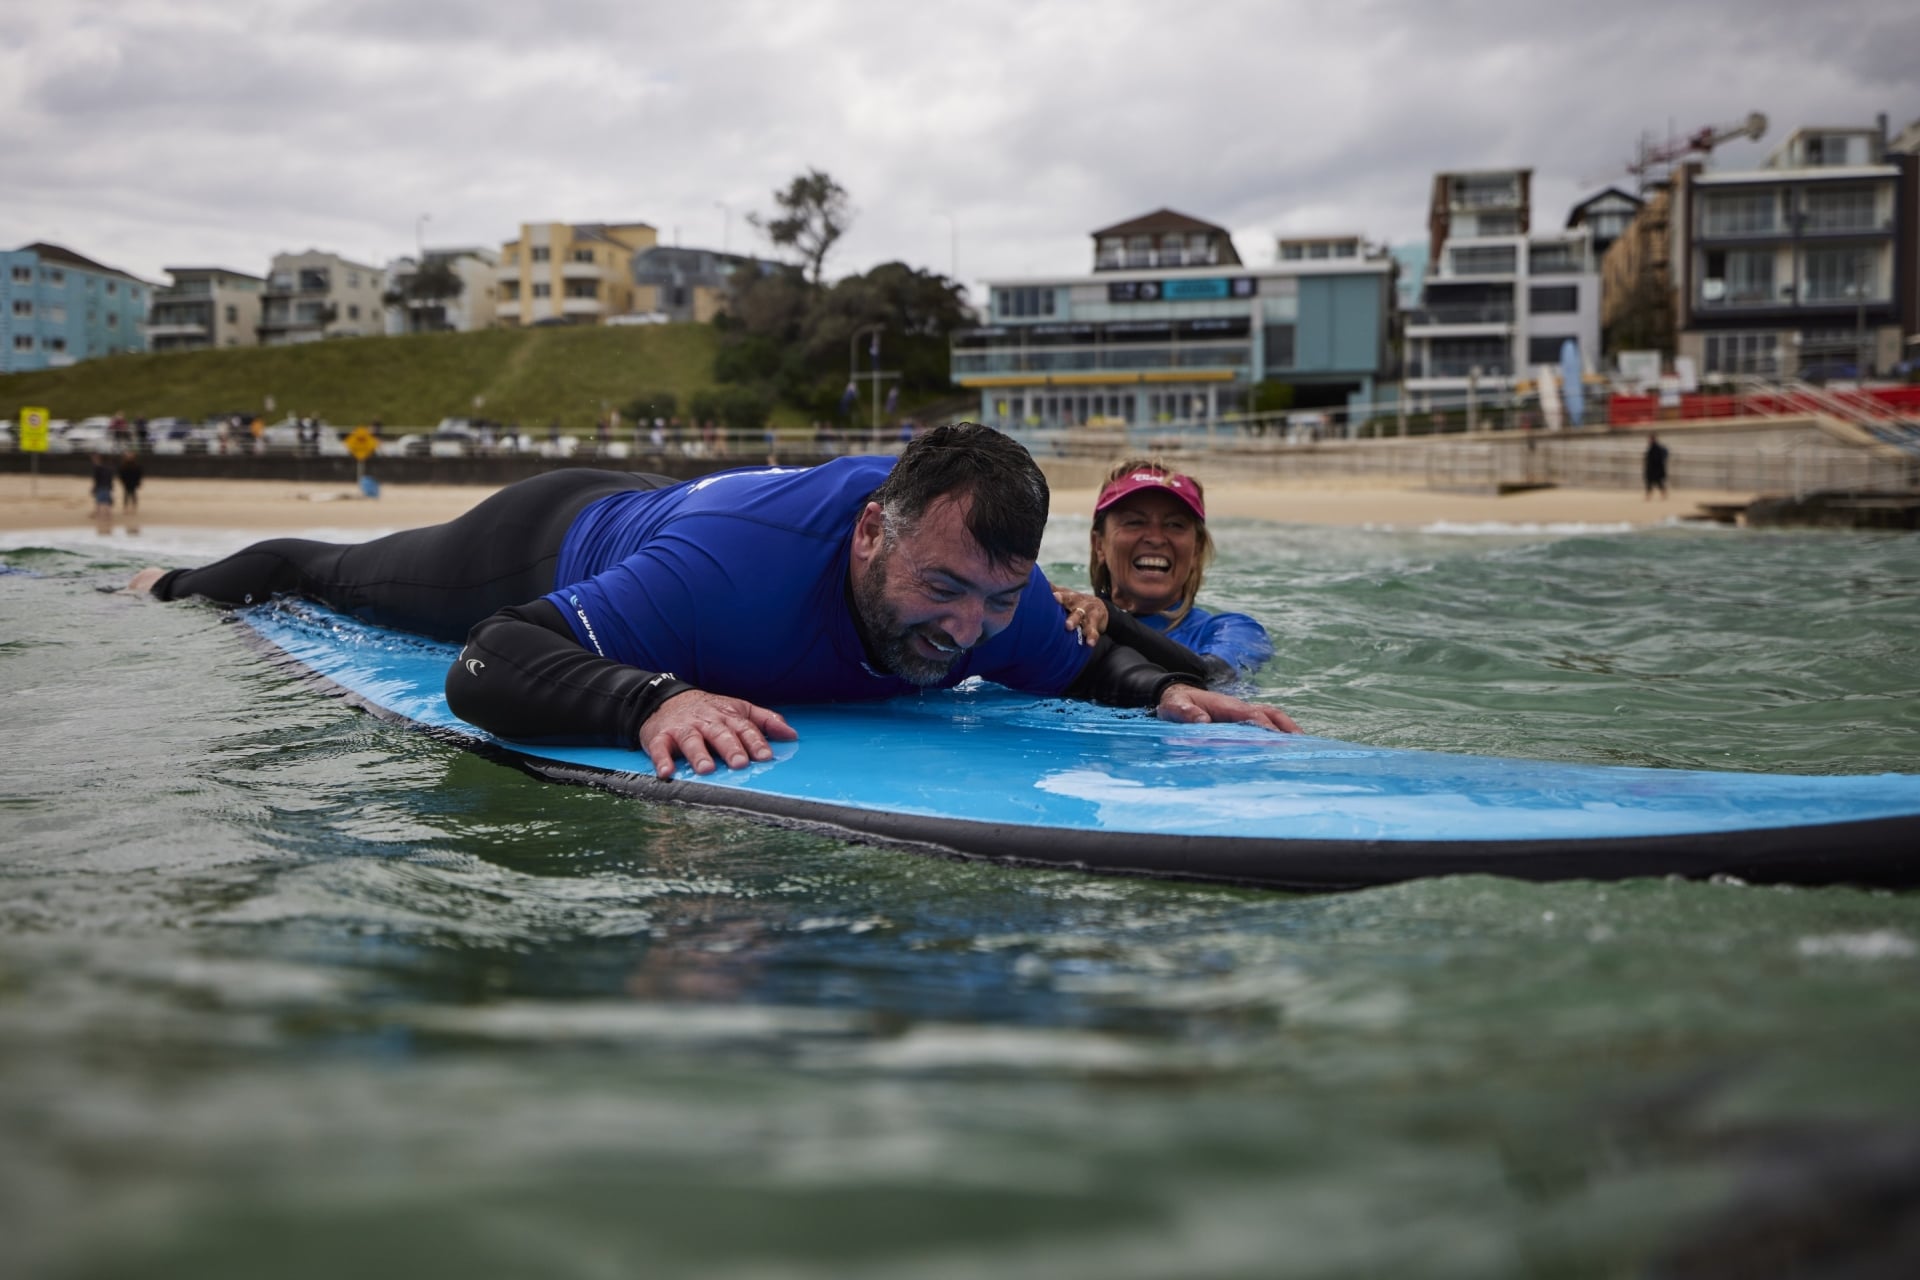 Man with limited vision on a surfboard being guided by a Let’s Go Surfing instructor at Bondi Beach, New South Wales © Tourism Australia